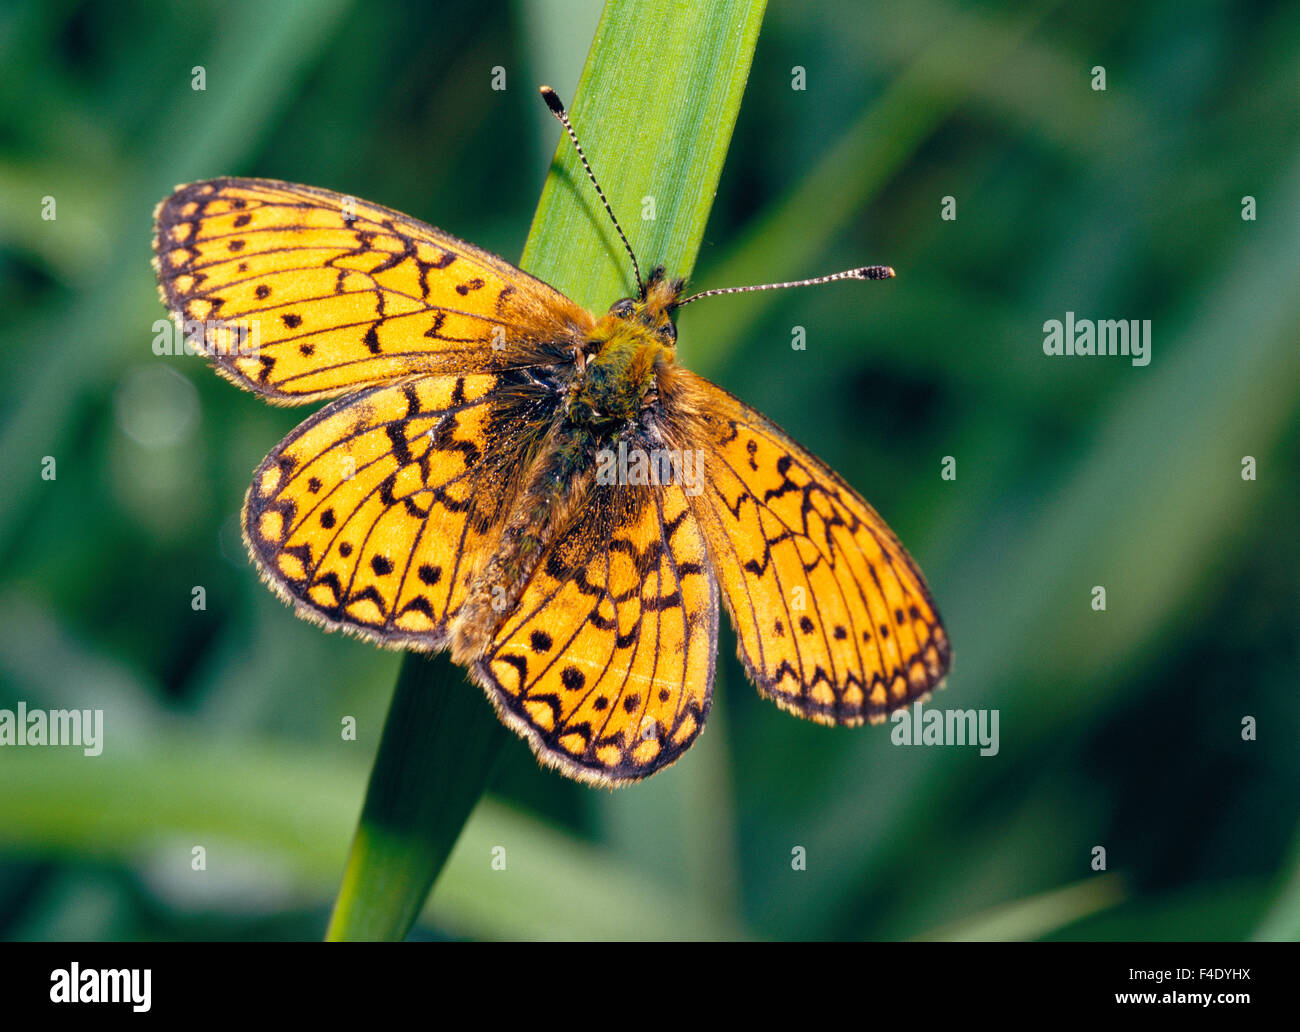 Butterfly on blade of grass, close-up Stock Photo